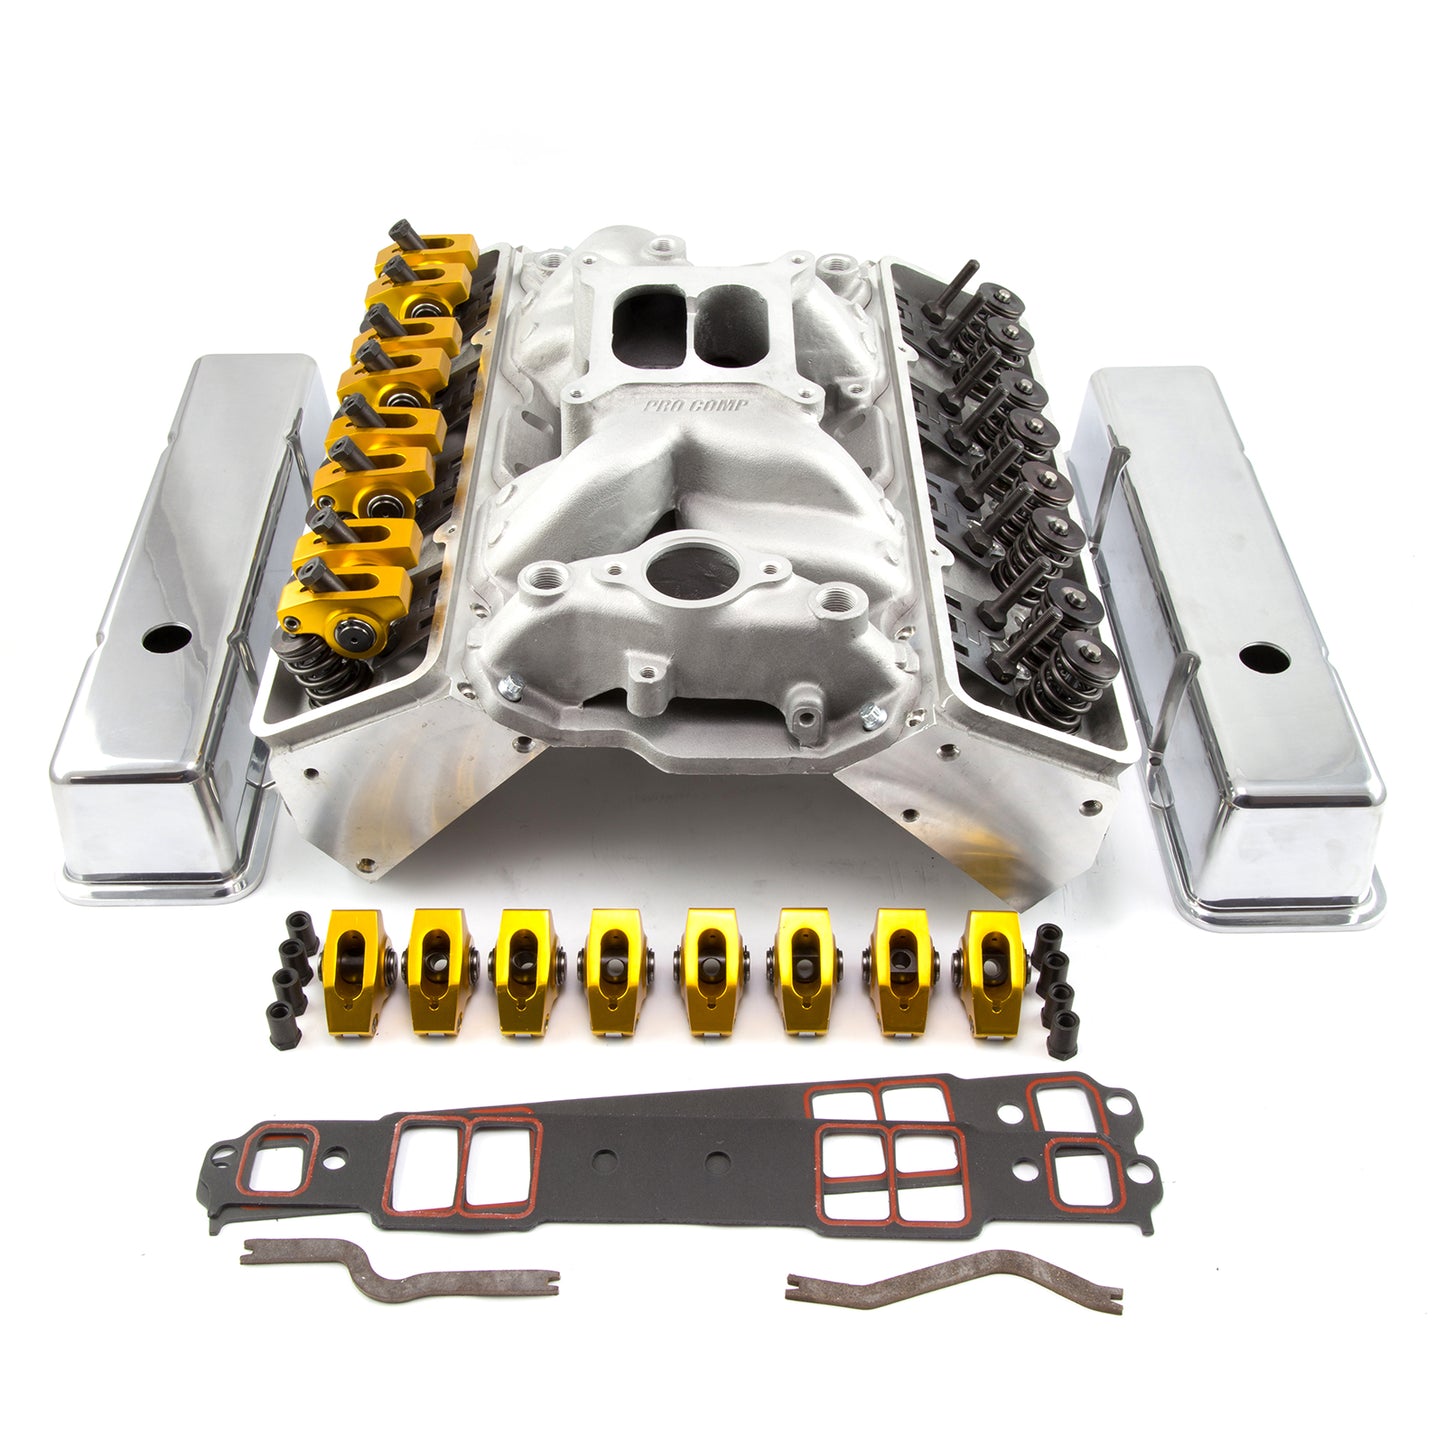 Speedmaster PCE435.1010 Fits Chevy SBC 350 Straight Plug Solid FT CNC Cylinder Head Top End Engine Combo Kit